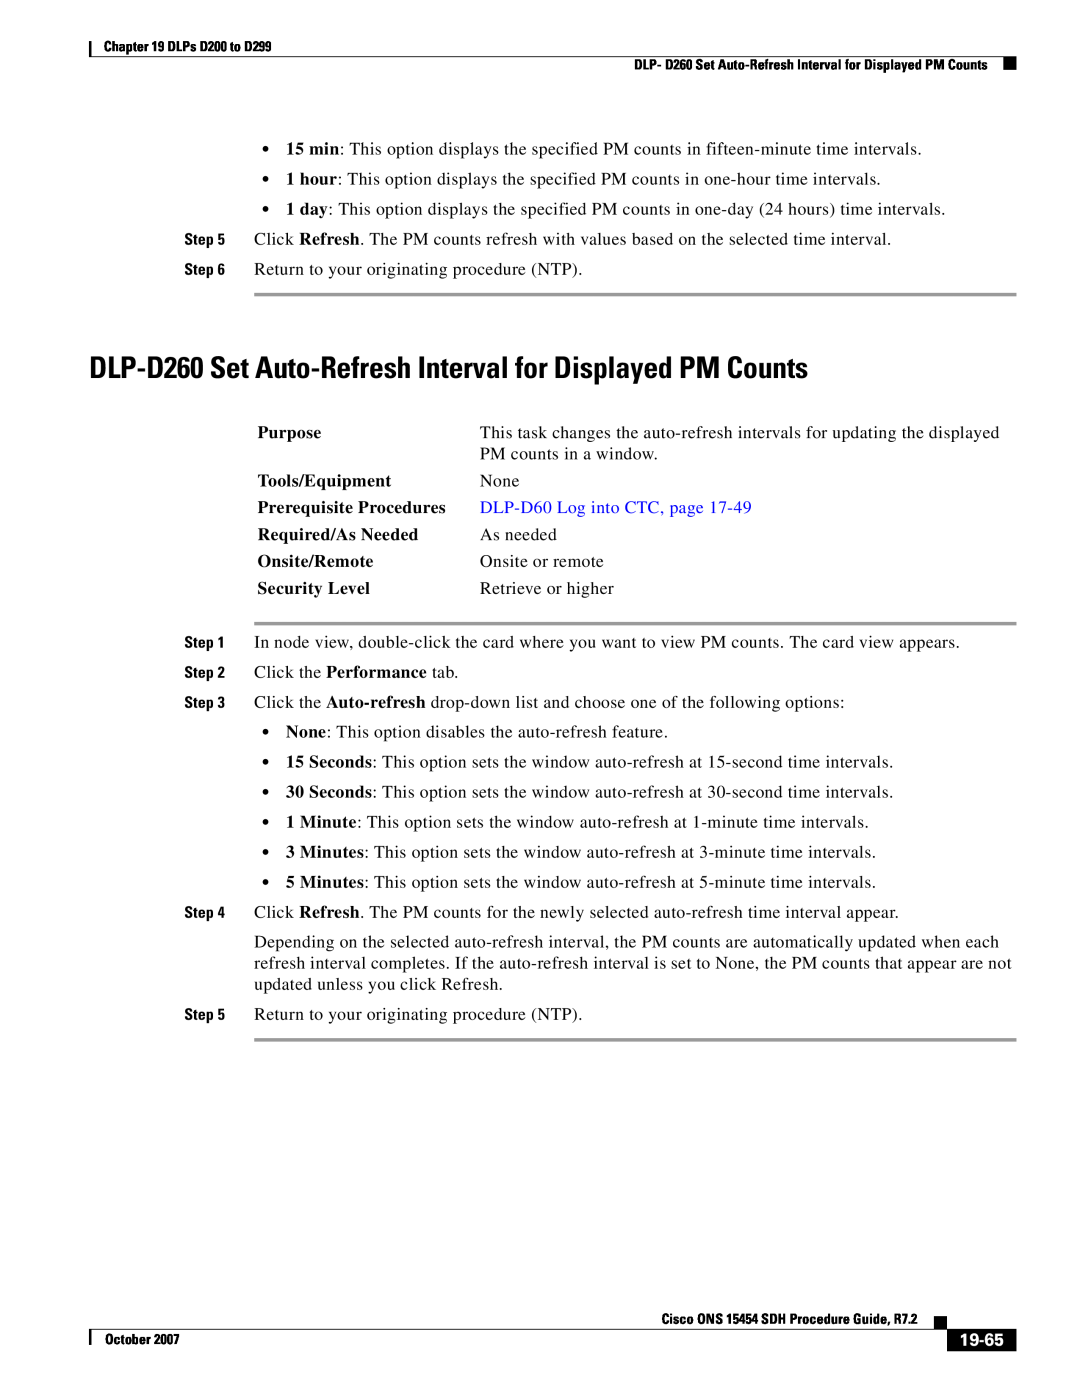 Cisco Systems D200 manual DLP-D260 Set Auto-Refresh Interval for Displayed PM Counts, 19-65, Purpose, Tools/Equipment 